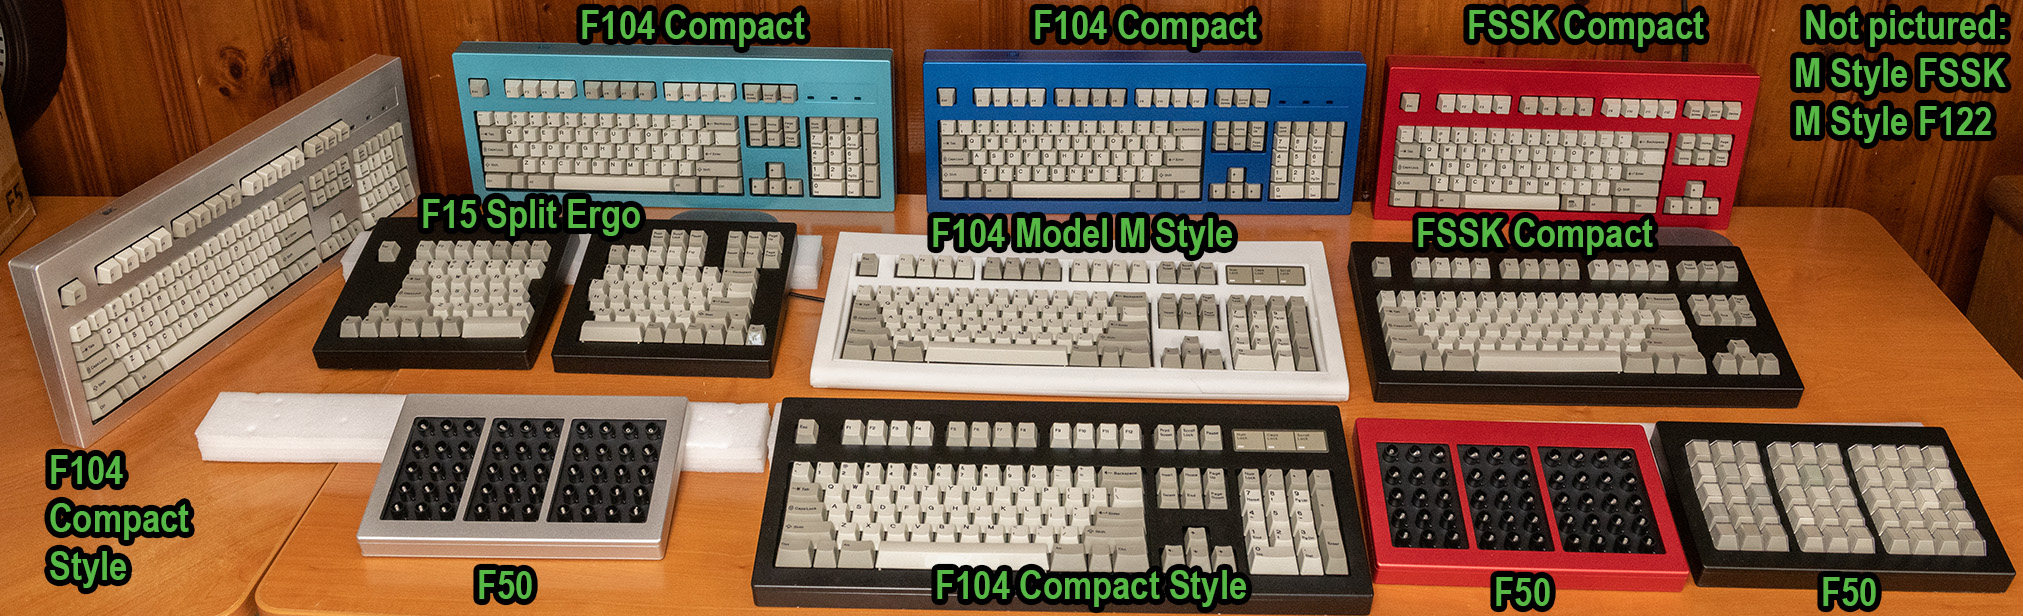 You are currently viewing Model F vs. Model M Differences Slide Deck (see below)